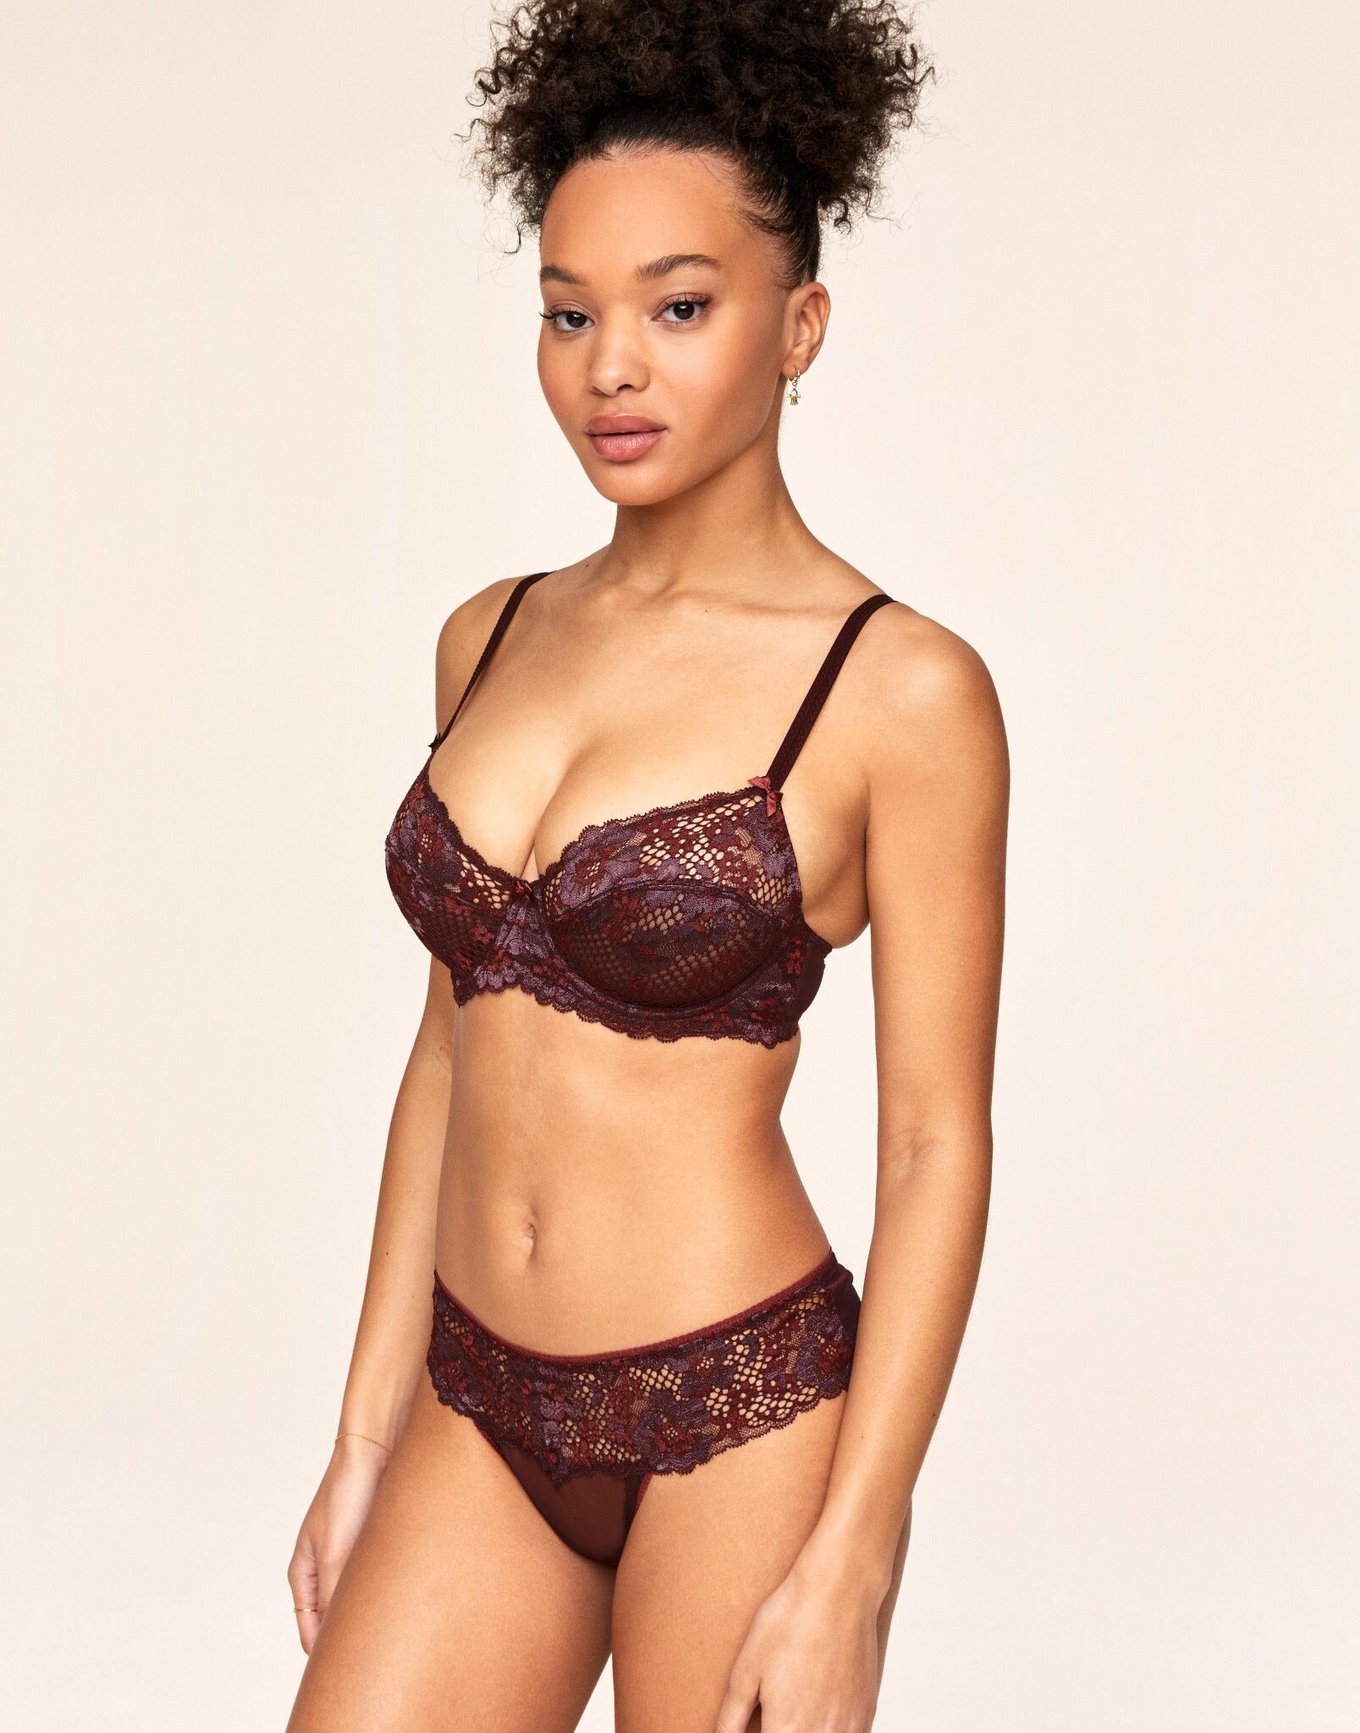 Cinthia Dark Brown 2 Unlined Full Coverage, 30A-38D